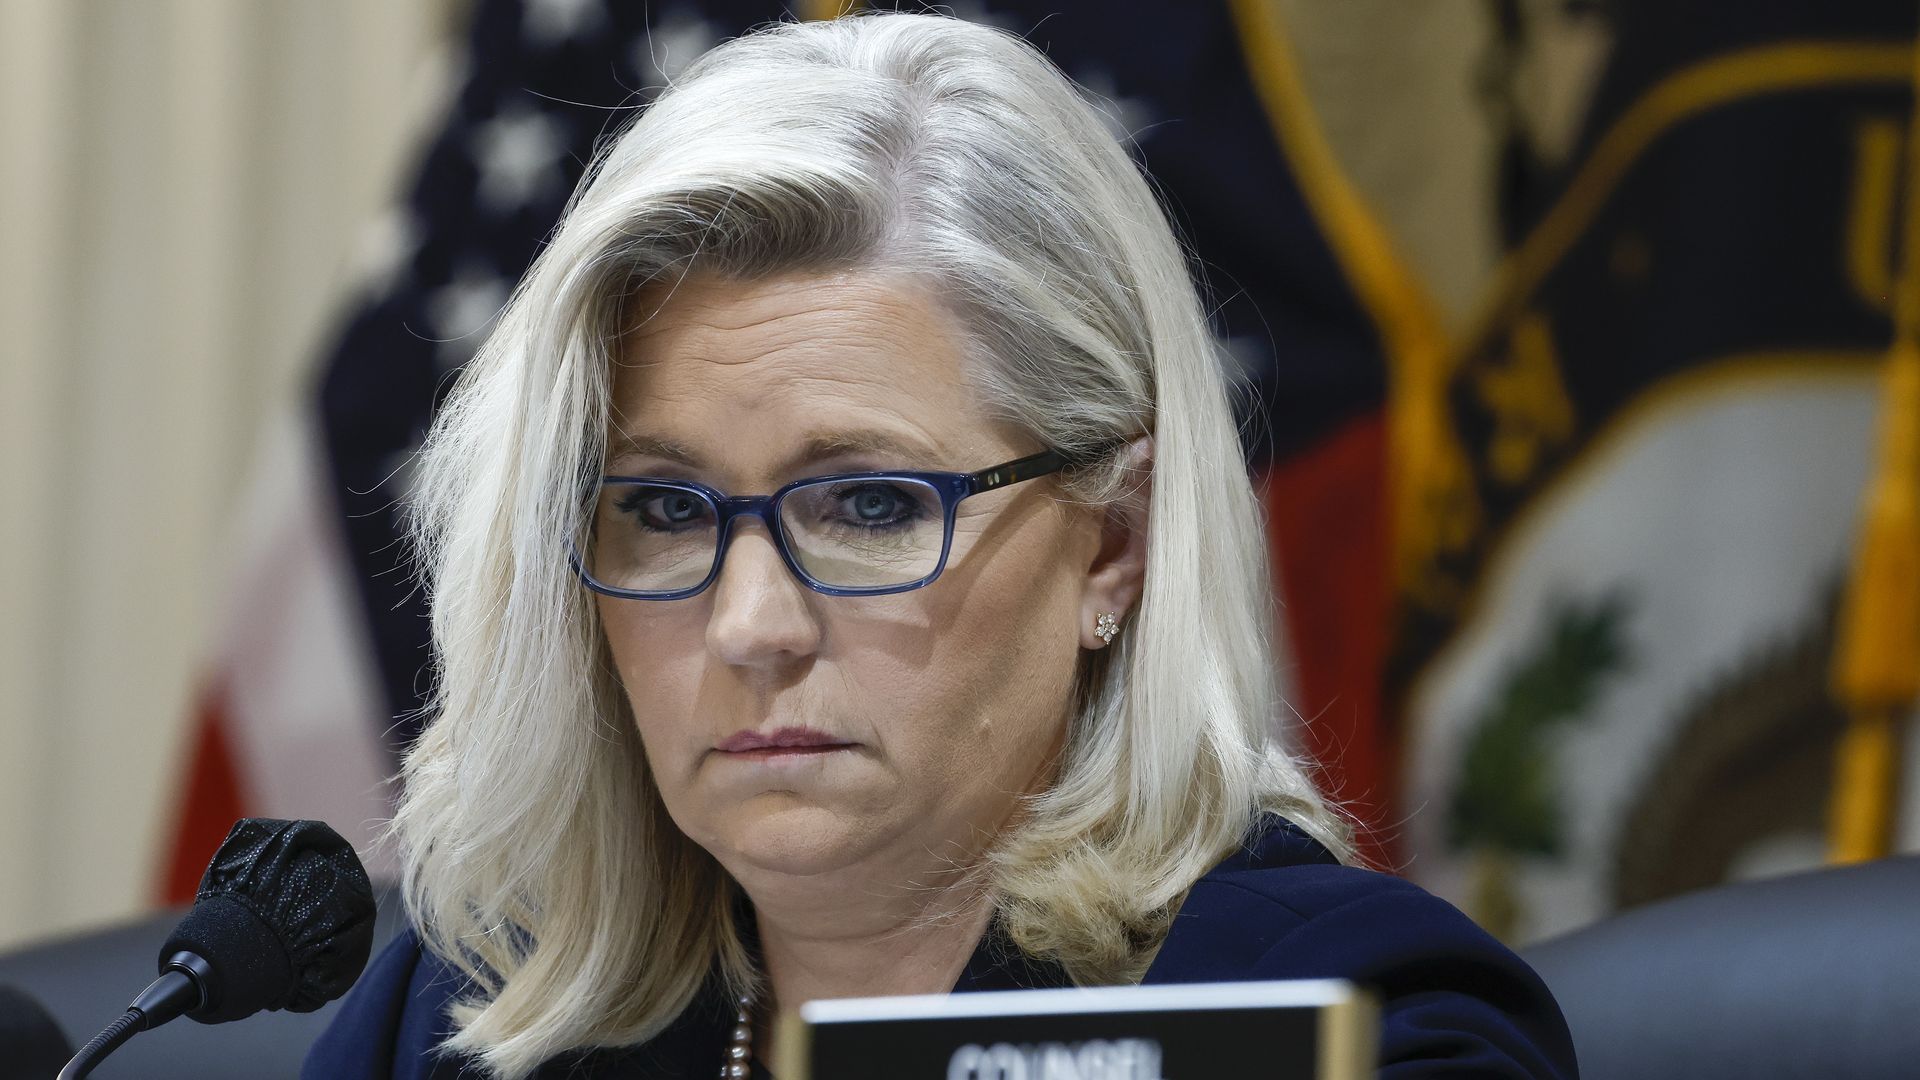 Rep. Liz Cheney (R-WY), Vice Chair of the House Select Committee to Investigate the Jan. 6 Attack on the U.S. Capitol during a hearing on June 28, 2022 in Washington, DC. 